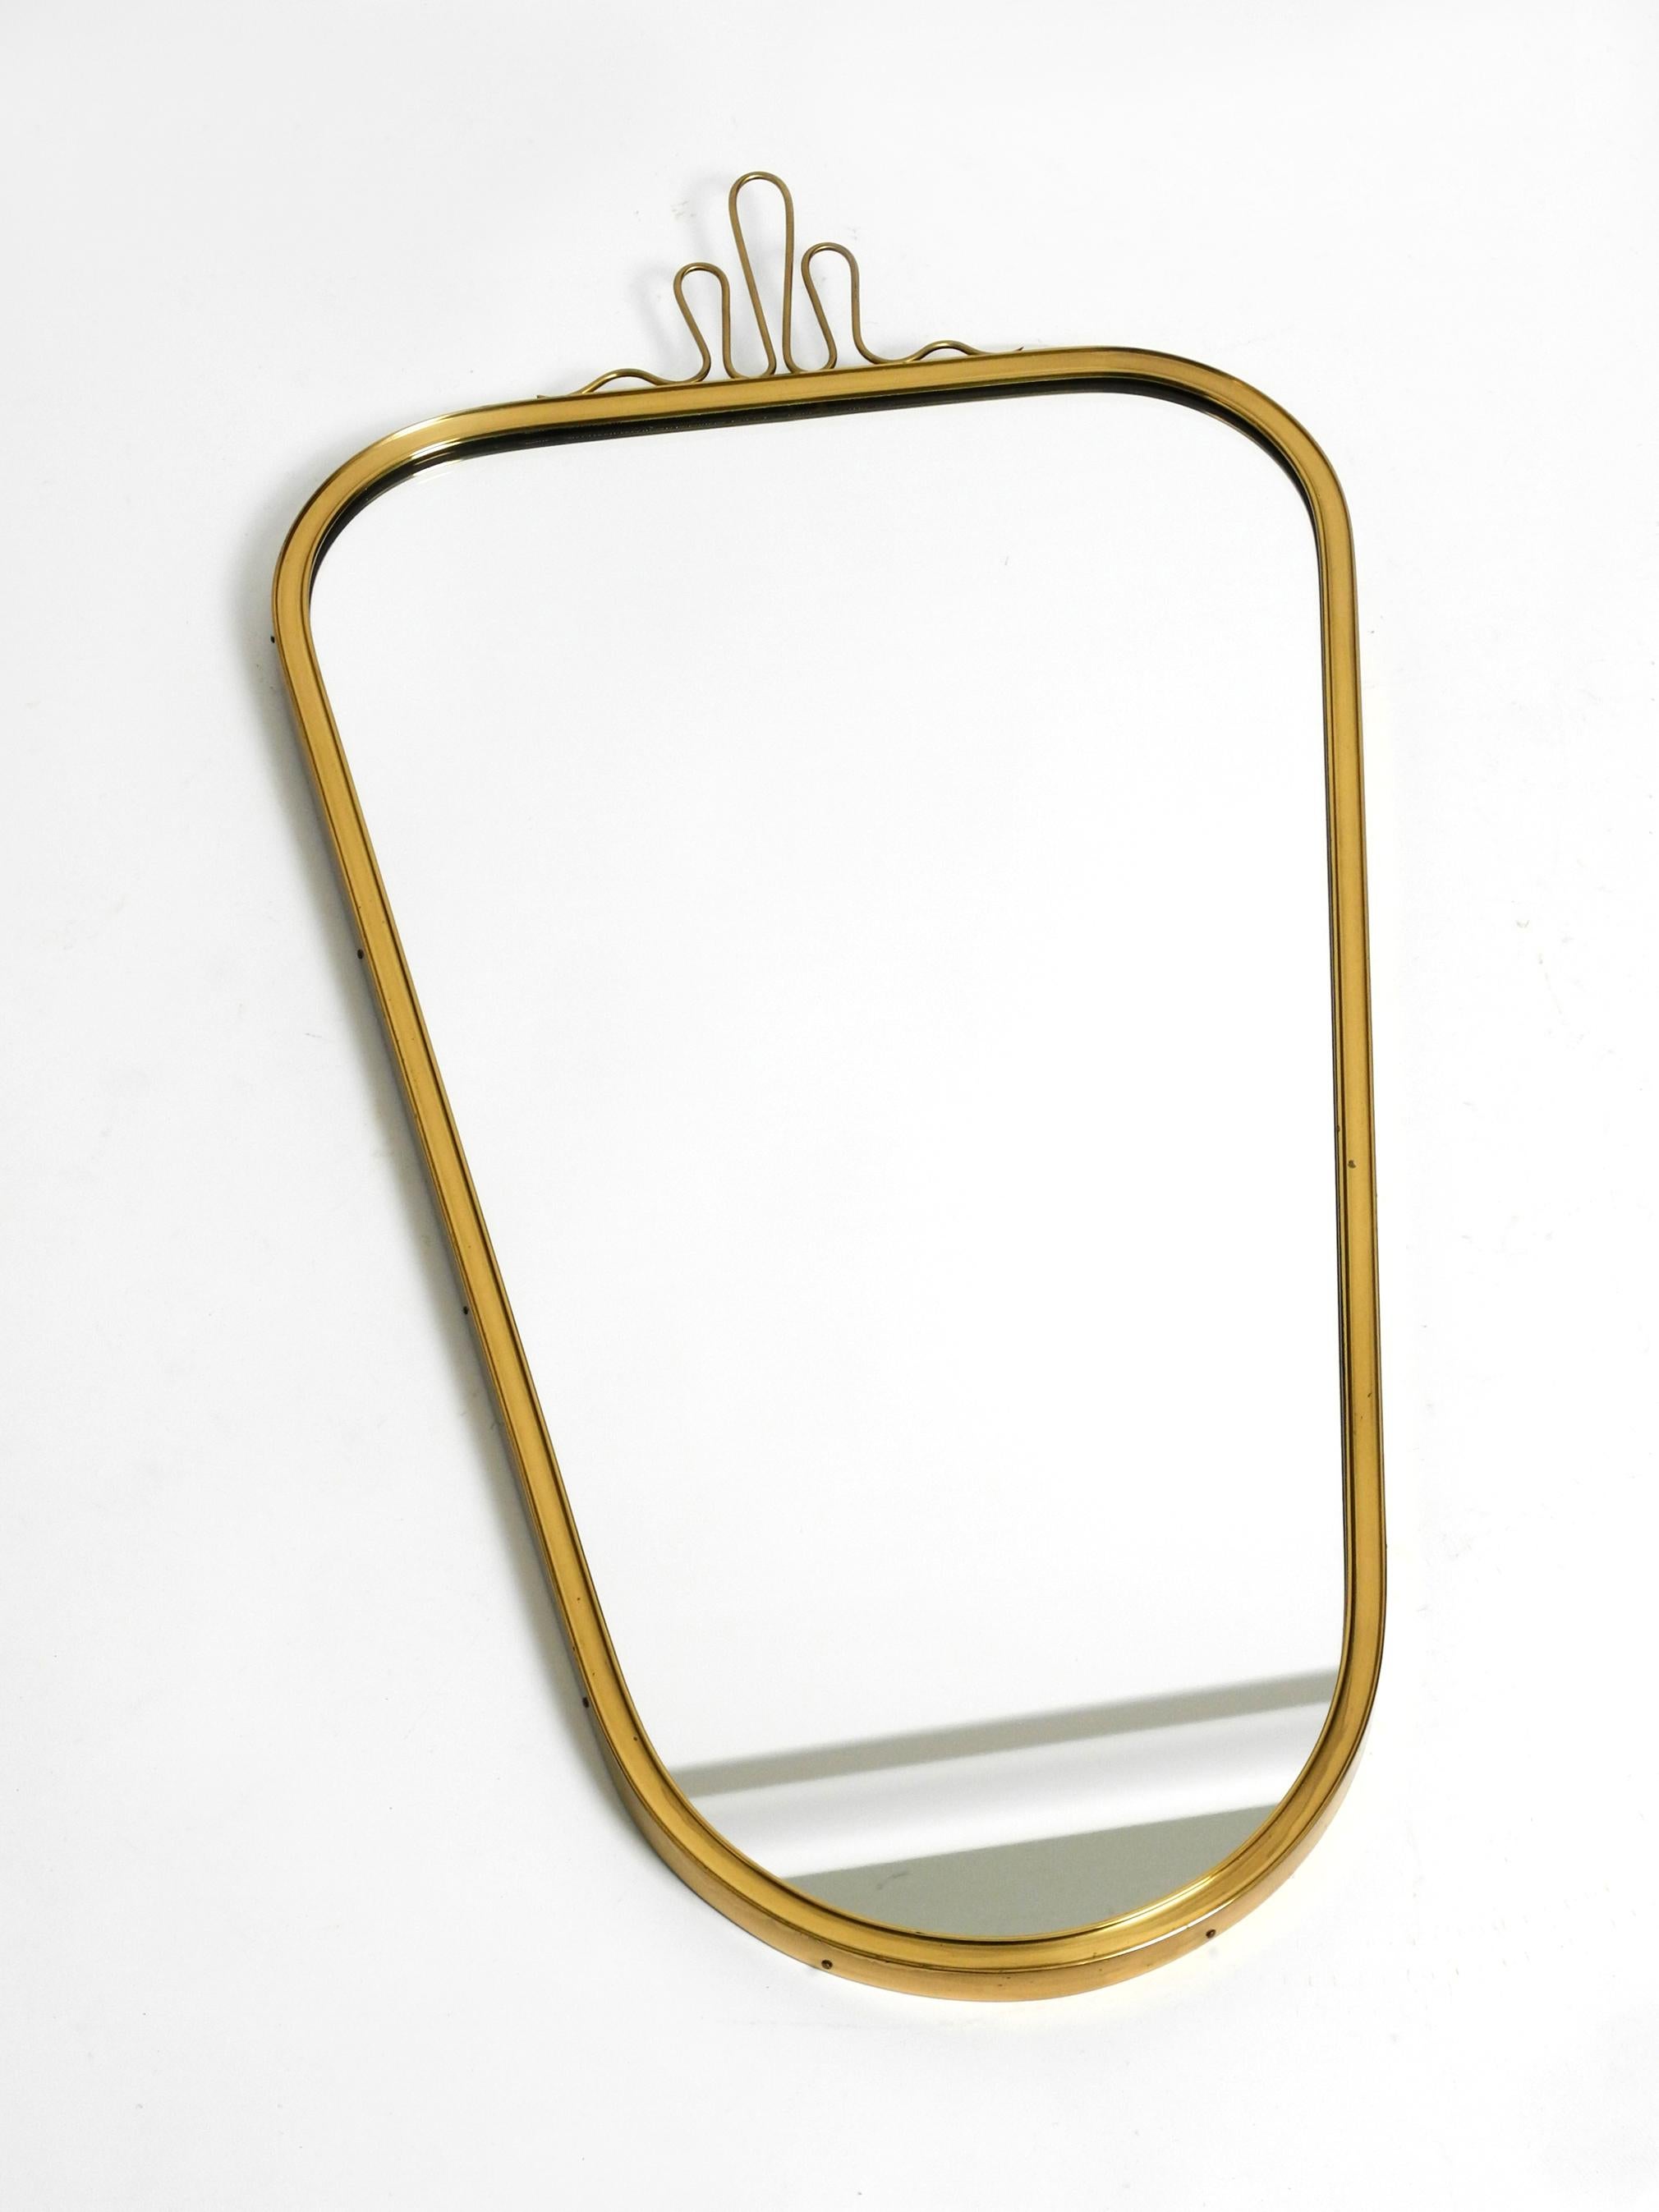 Beautiful heavy Mid Century Modern brass wall mirror from Münchner Zierspiegel.
Made in Germany. Great 1950s minimalist very elegant design.
Very high quality and elegantly processed.
A large brass crown is screwed onto the top.
Heavy and very